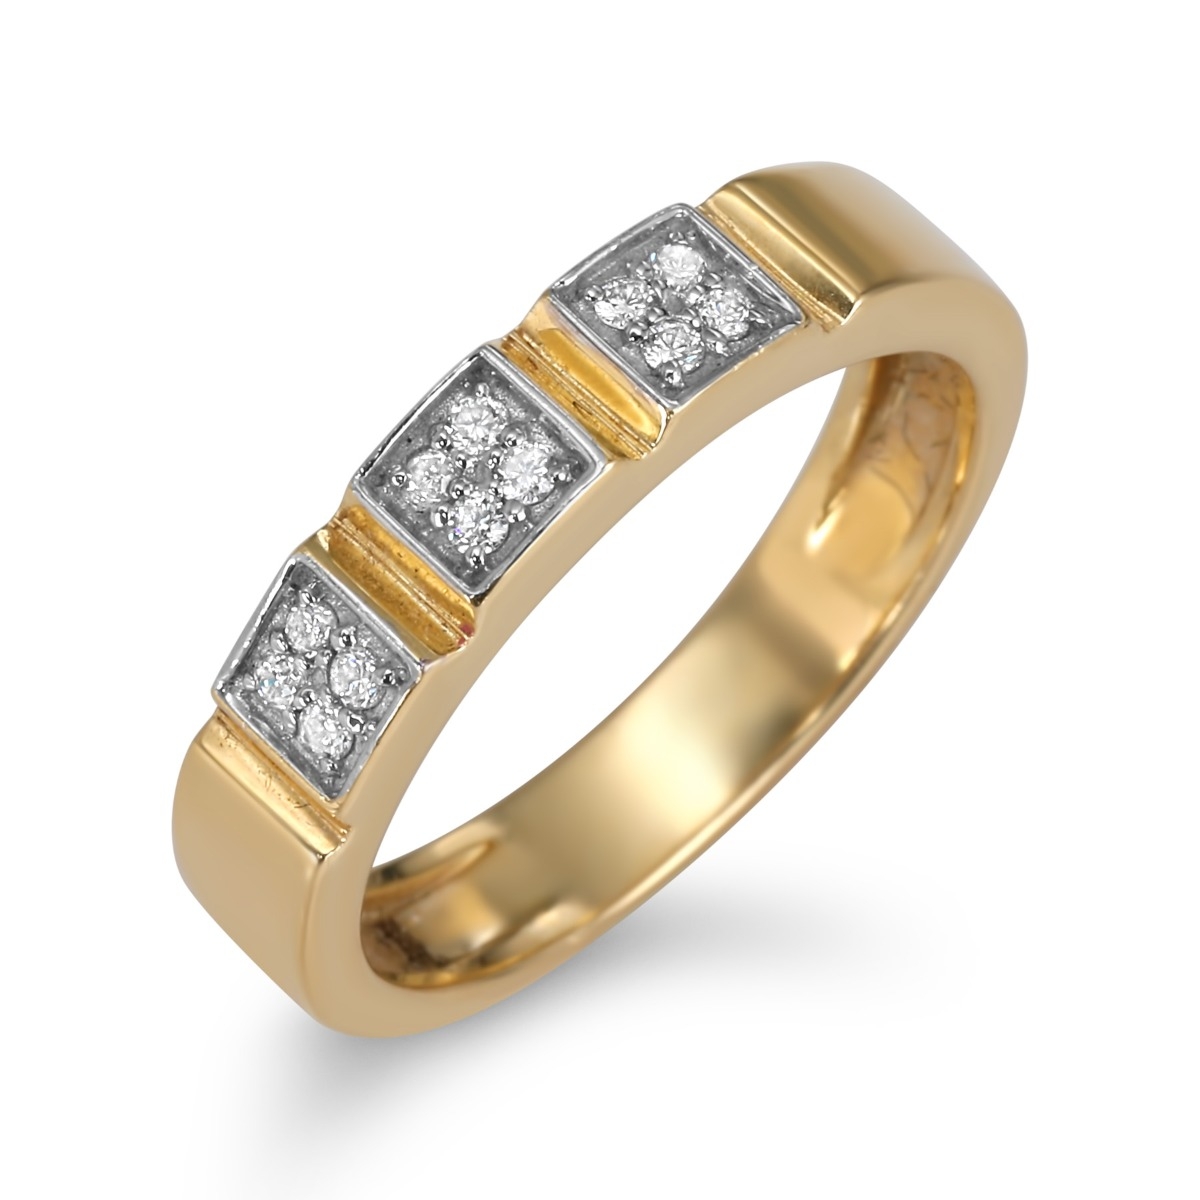 Anbinder 14K Gold Three Squares Ring with 12 Diamonds - 1